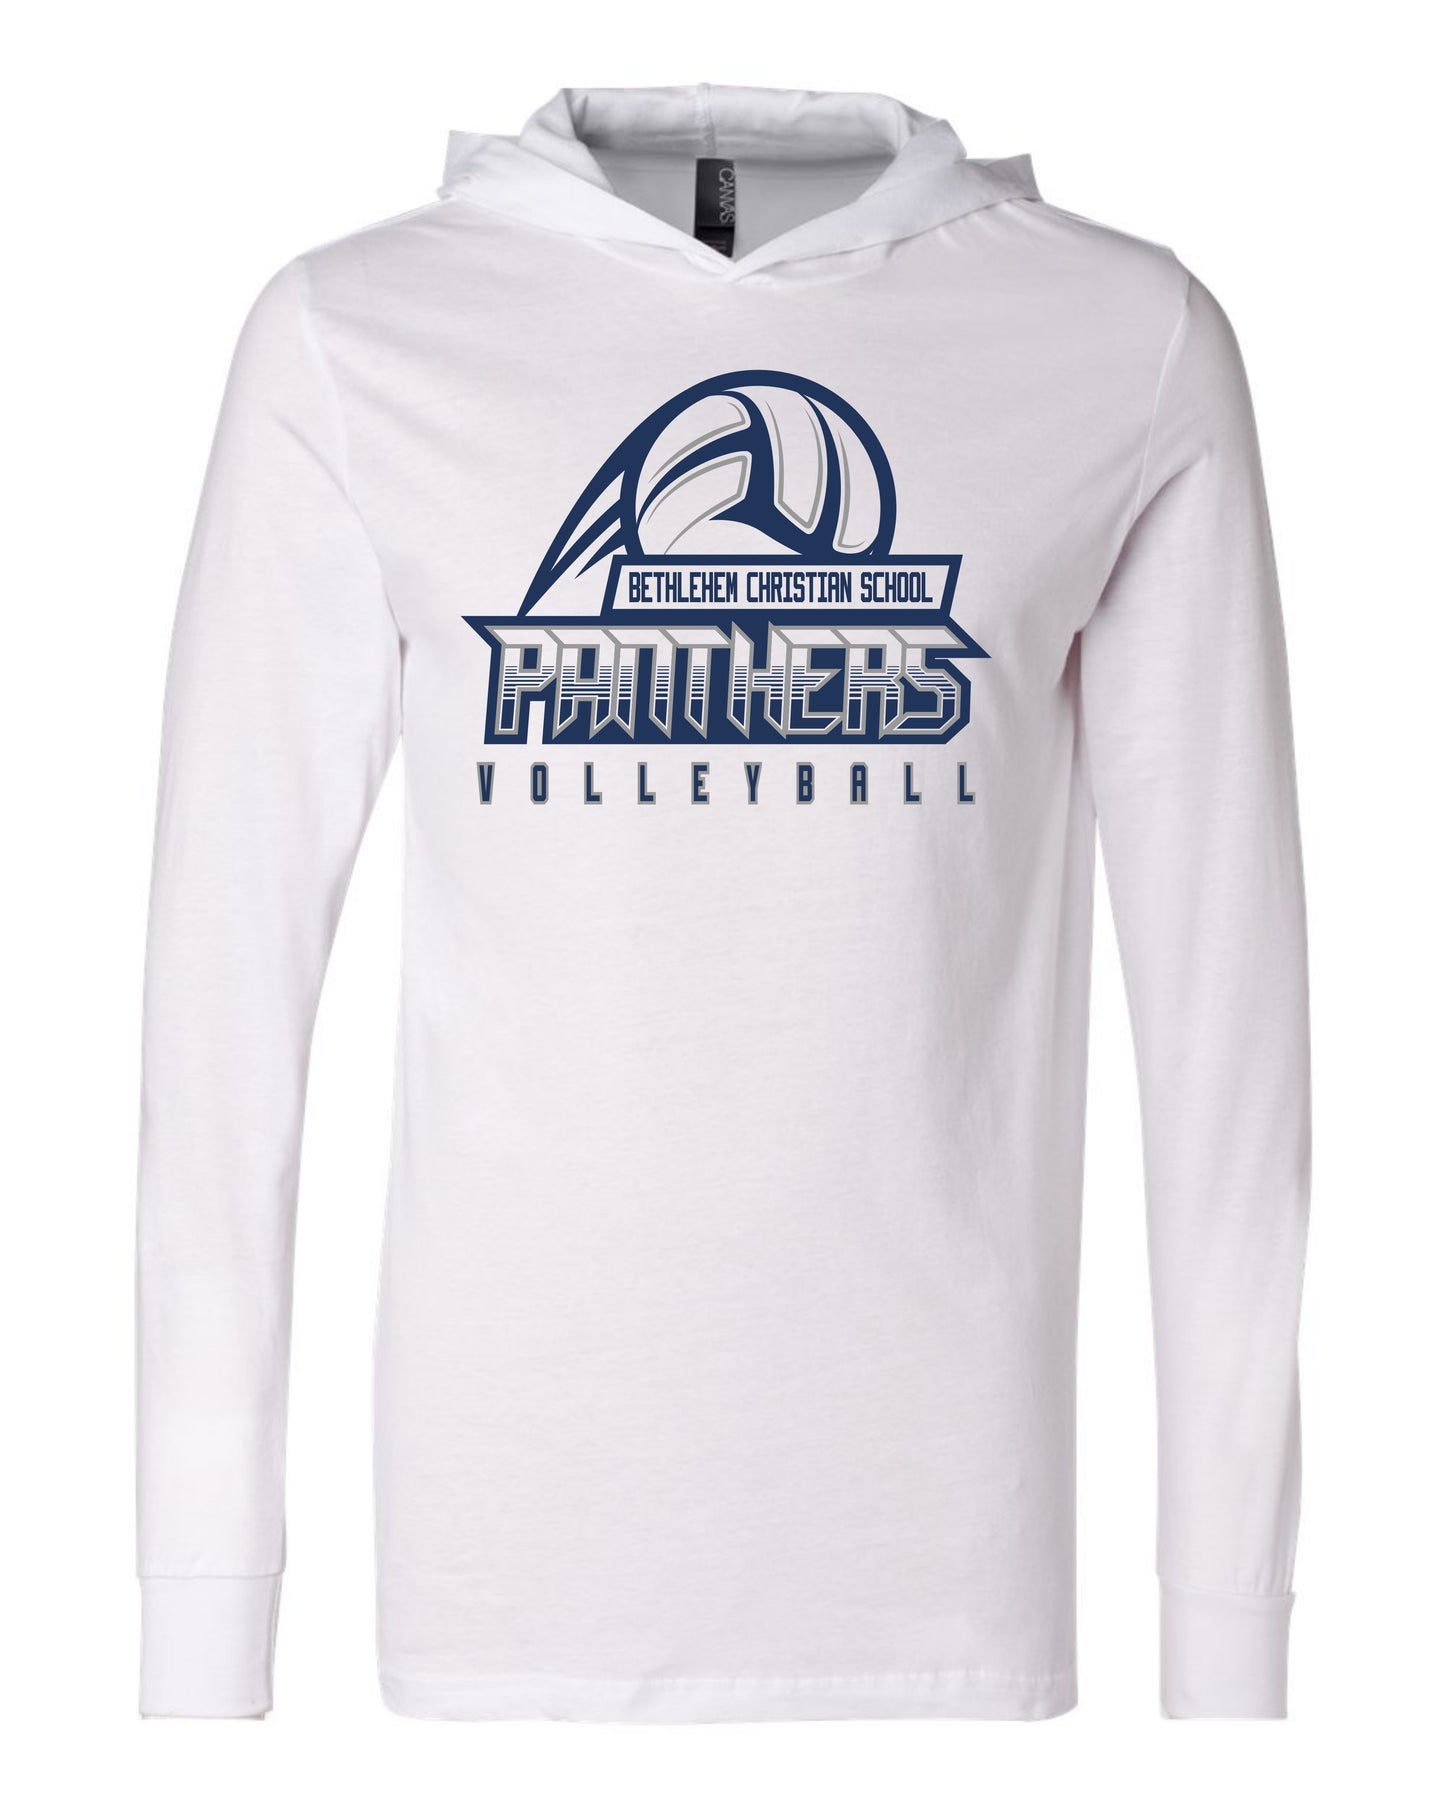 BCS Panthers Volleyball - Adult Hooded Long Sleeve